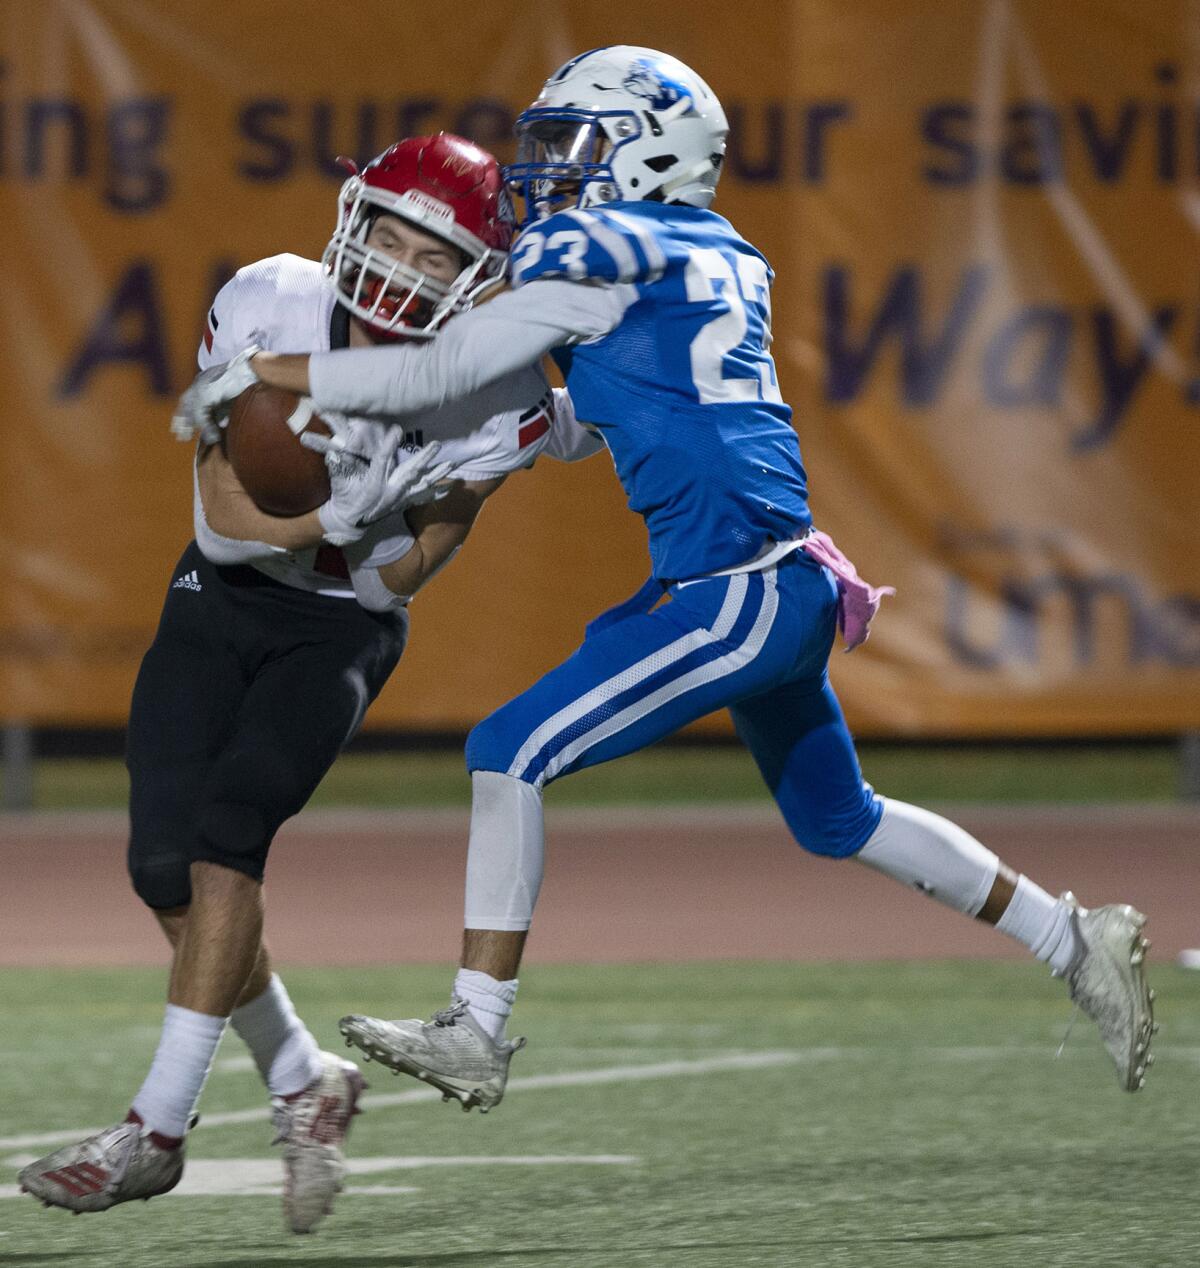 Burroughs’ Aiden Forrester pulls in a long pass while under heavy pressure form Burroughs’ Kaze Gibbs during Friday's homecoming game at Memorial Field. (Photo by Miguel Vasconcellos)